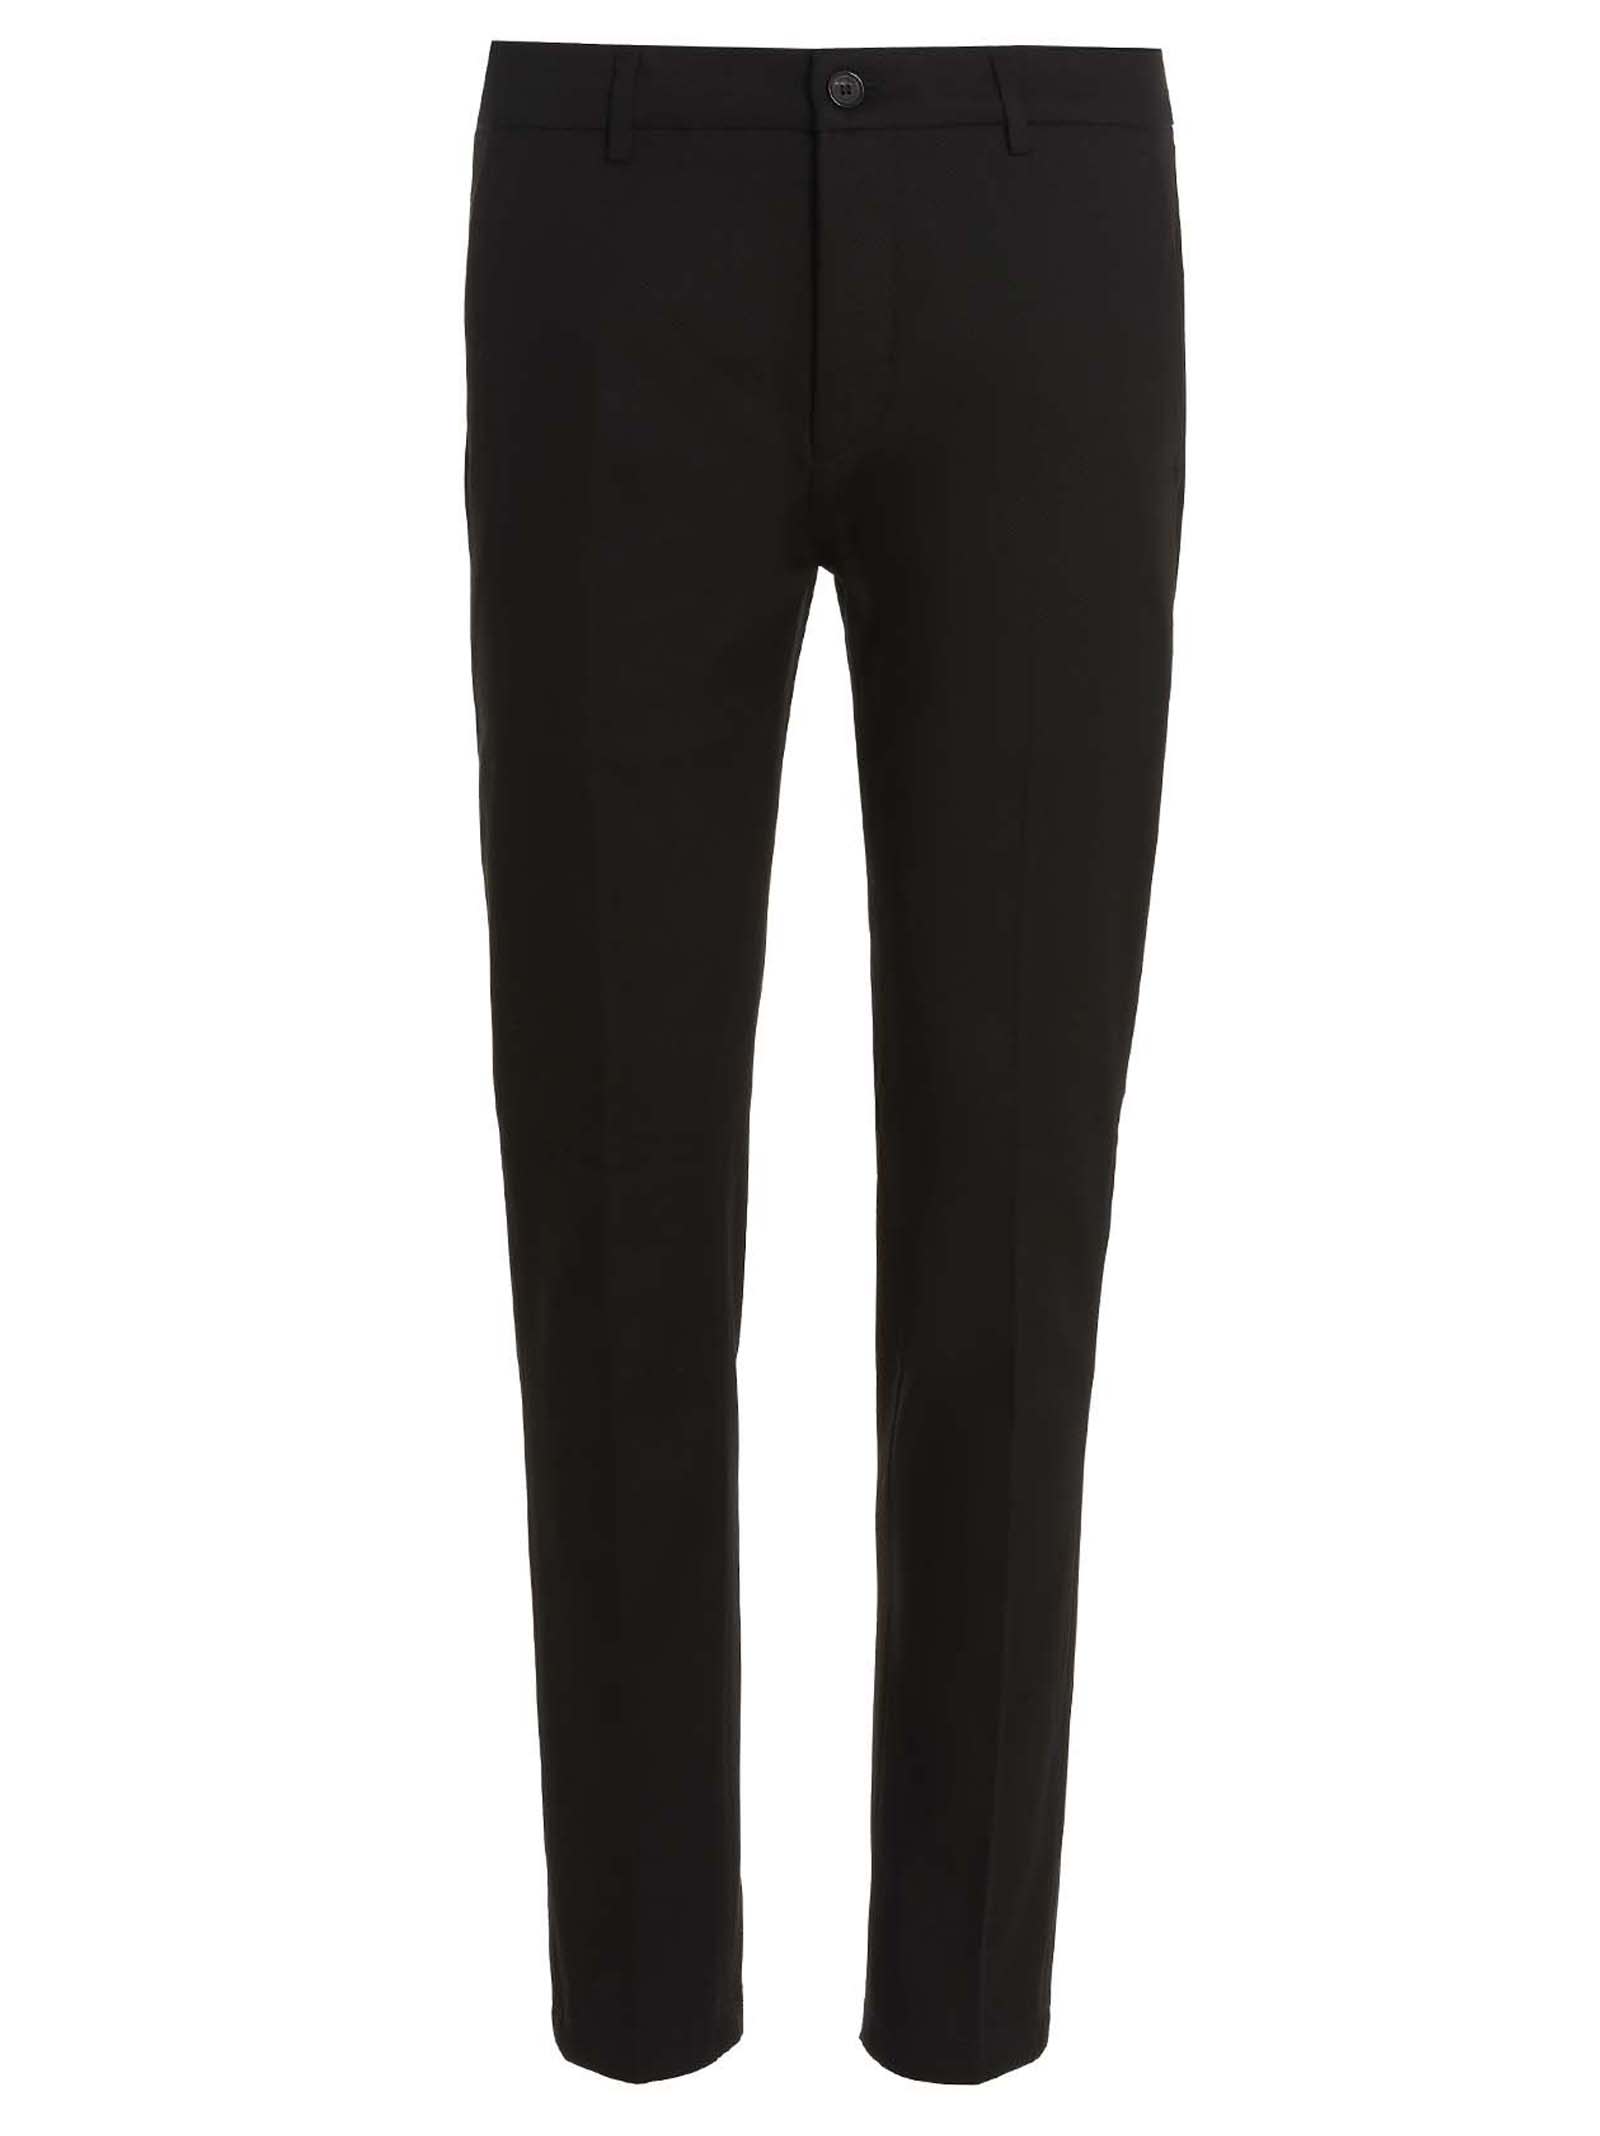 DEPARTMENT FIVE PRINCE trousers